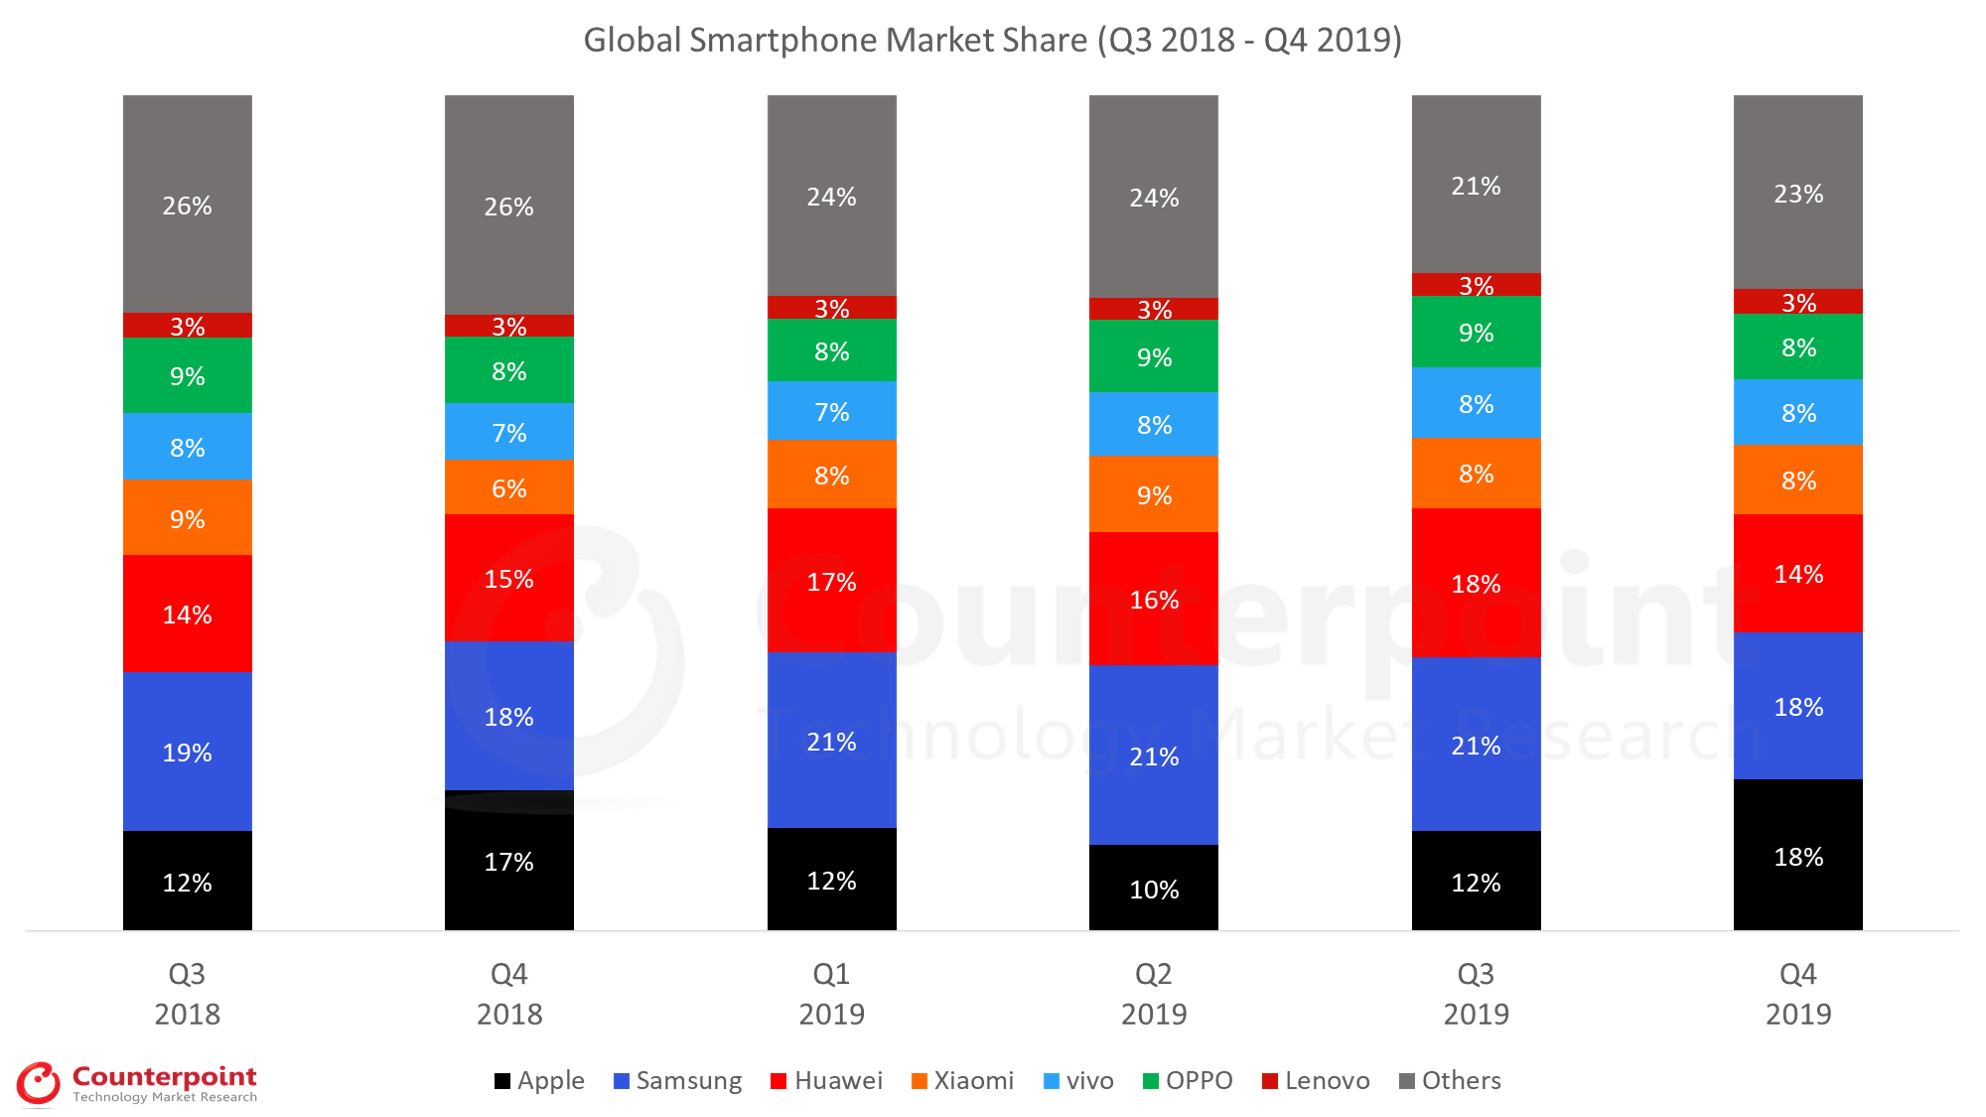 Counterpoint Research - Q4 2019 - Global Smartphone Market